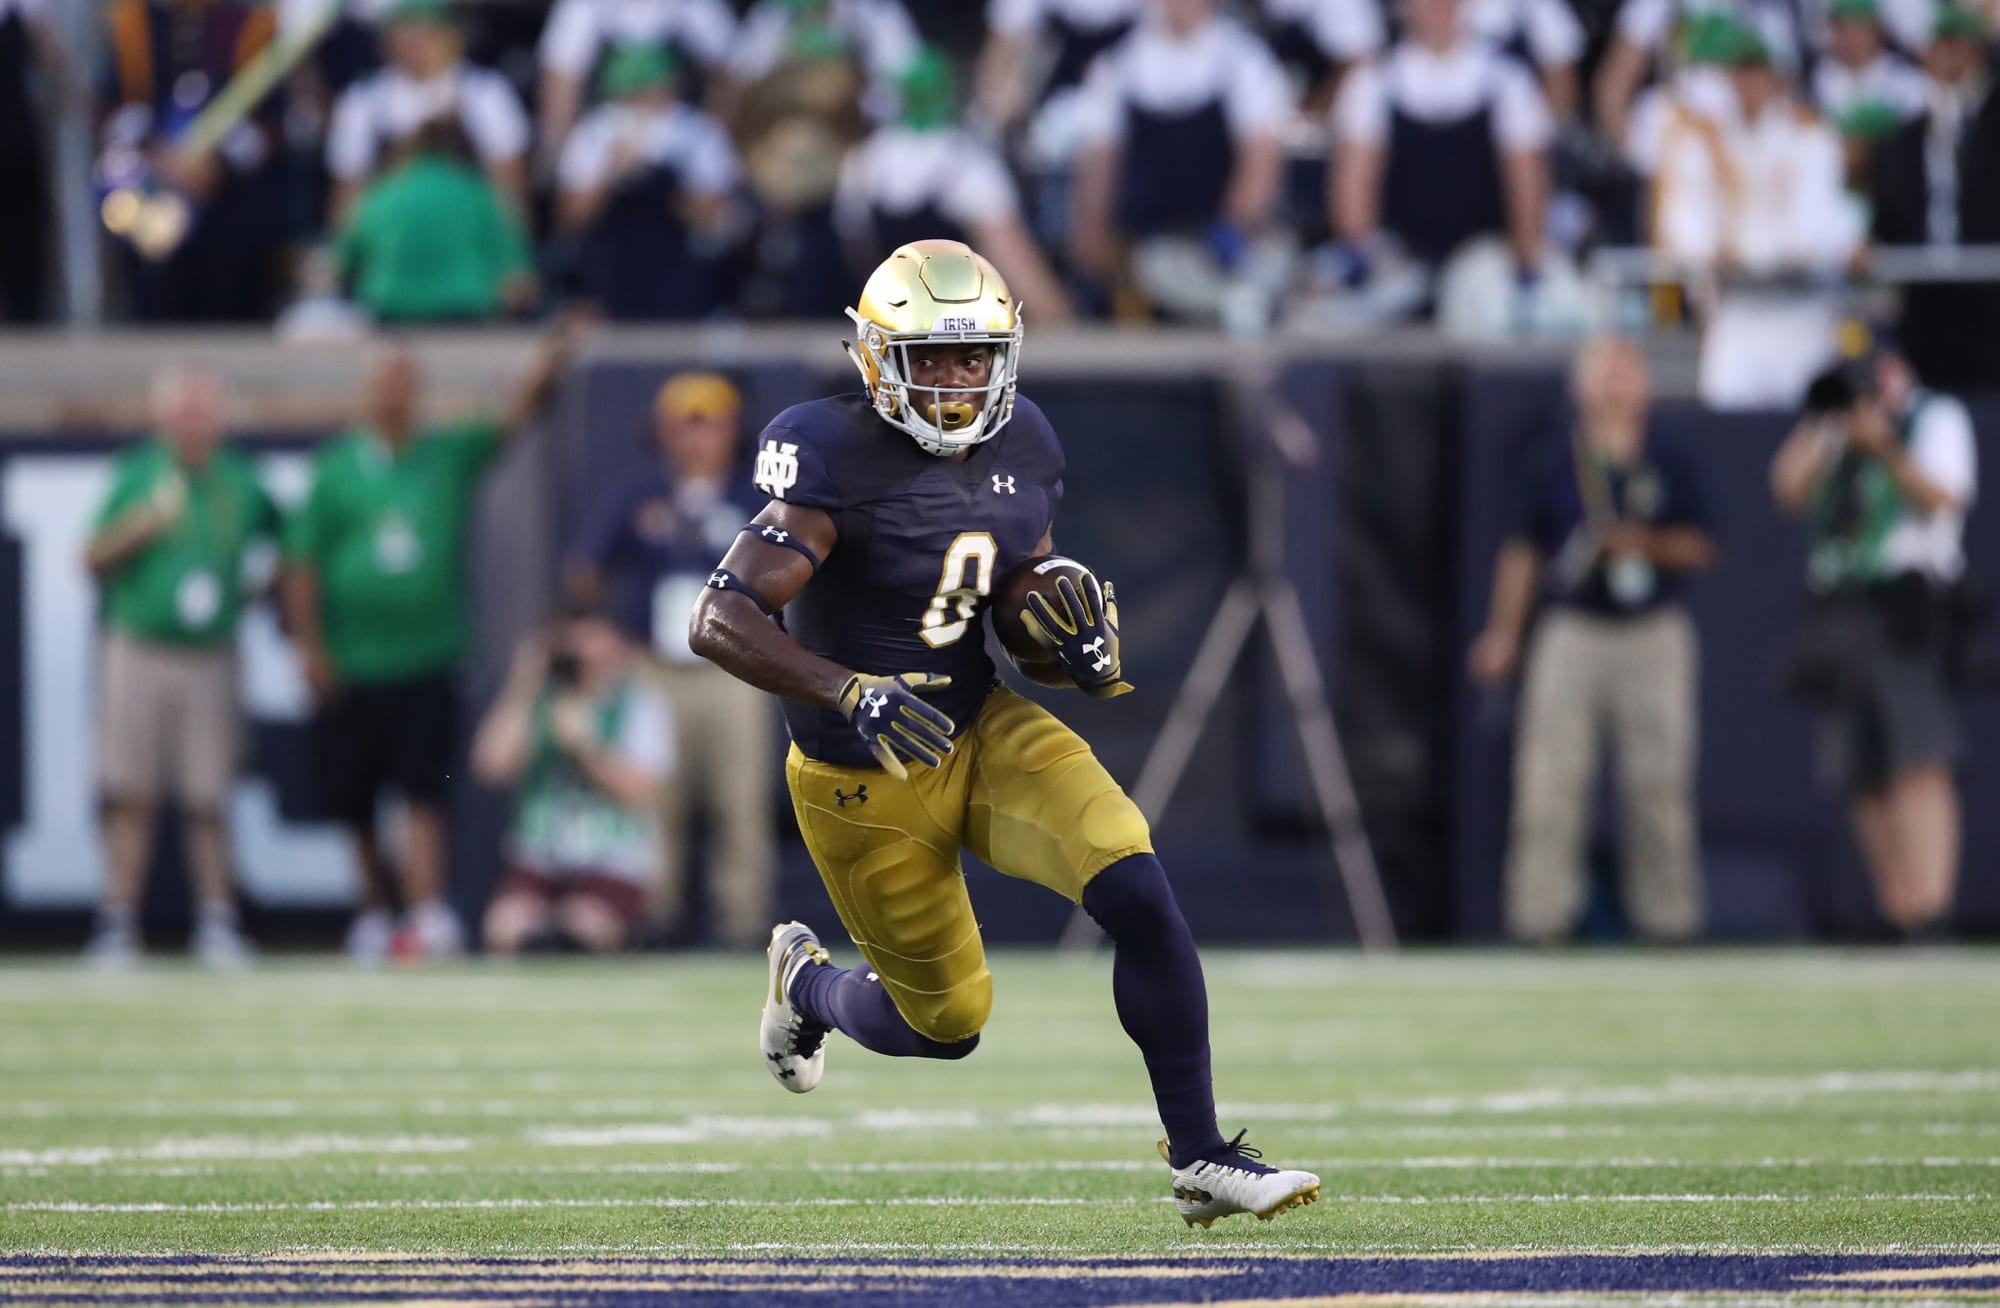 Notre Dame Football: Jafar Armstrong was Offensive Player of the Game